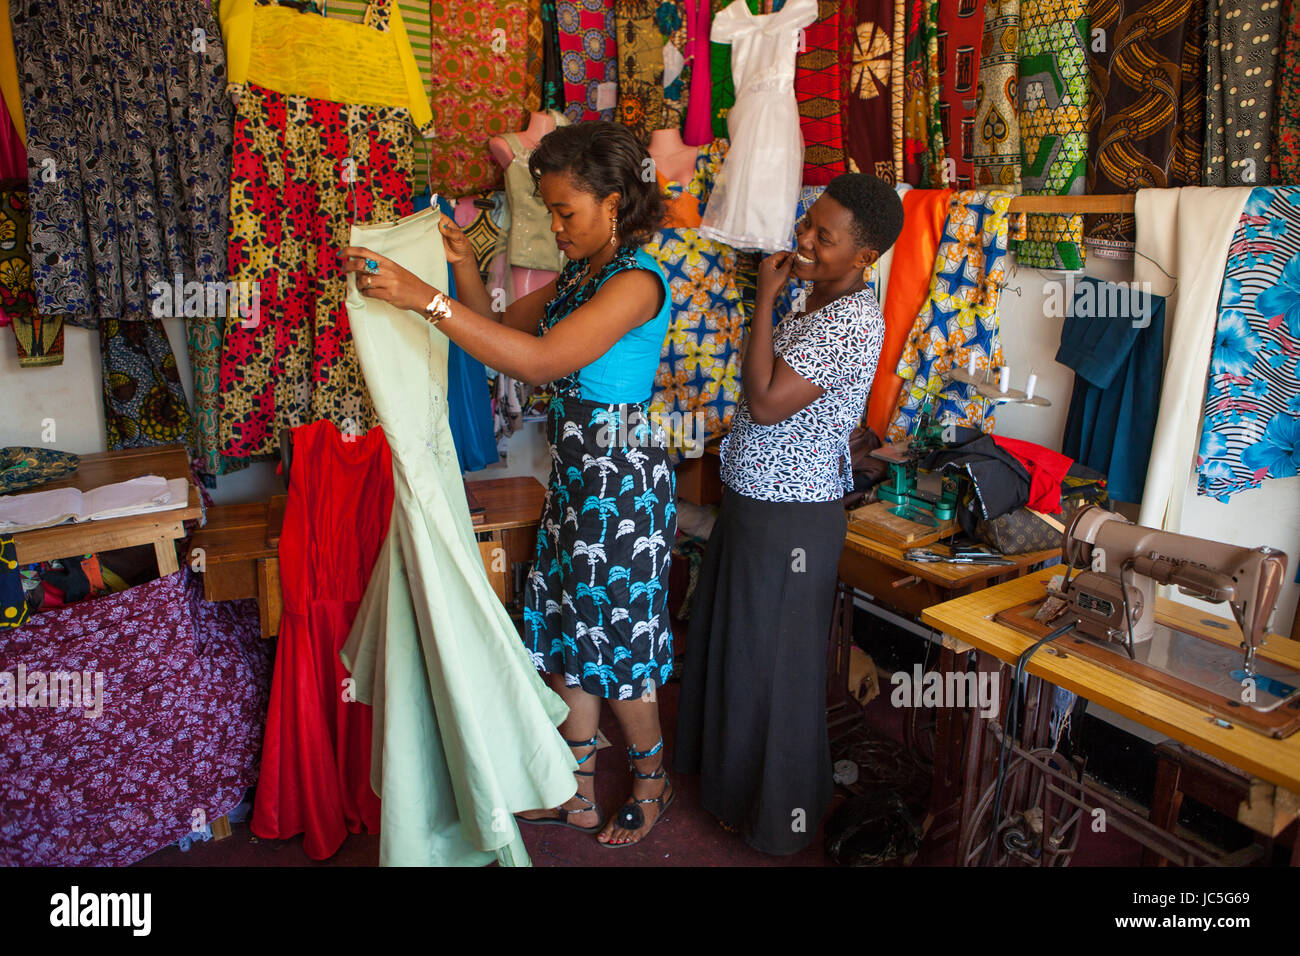 A small business female tailor showing a customer some fabric in her shop, Tanzania, Africa. Stock Photo